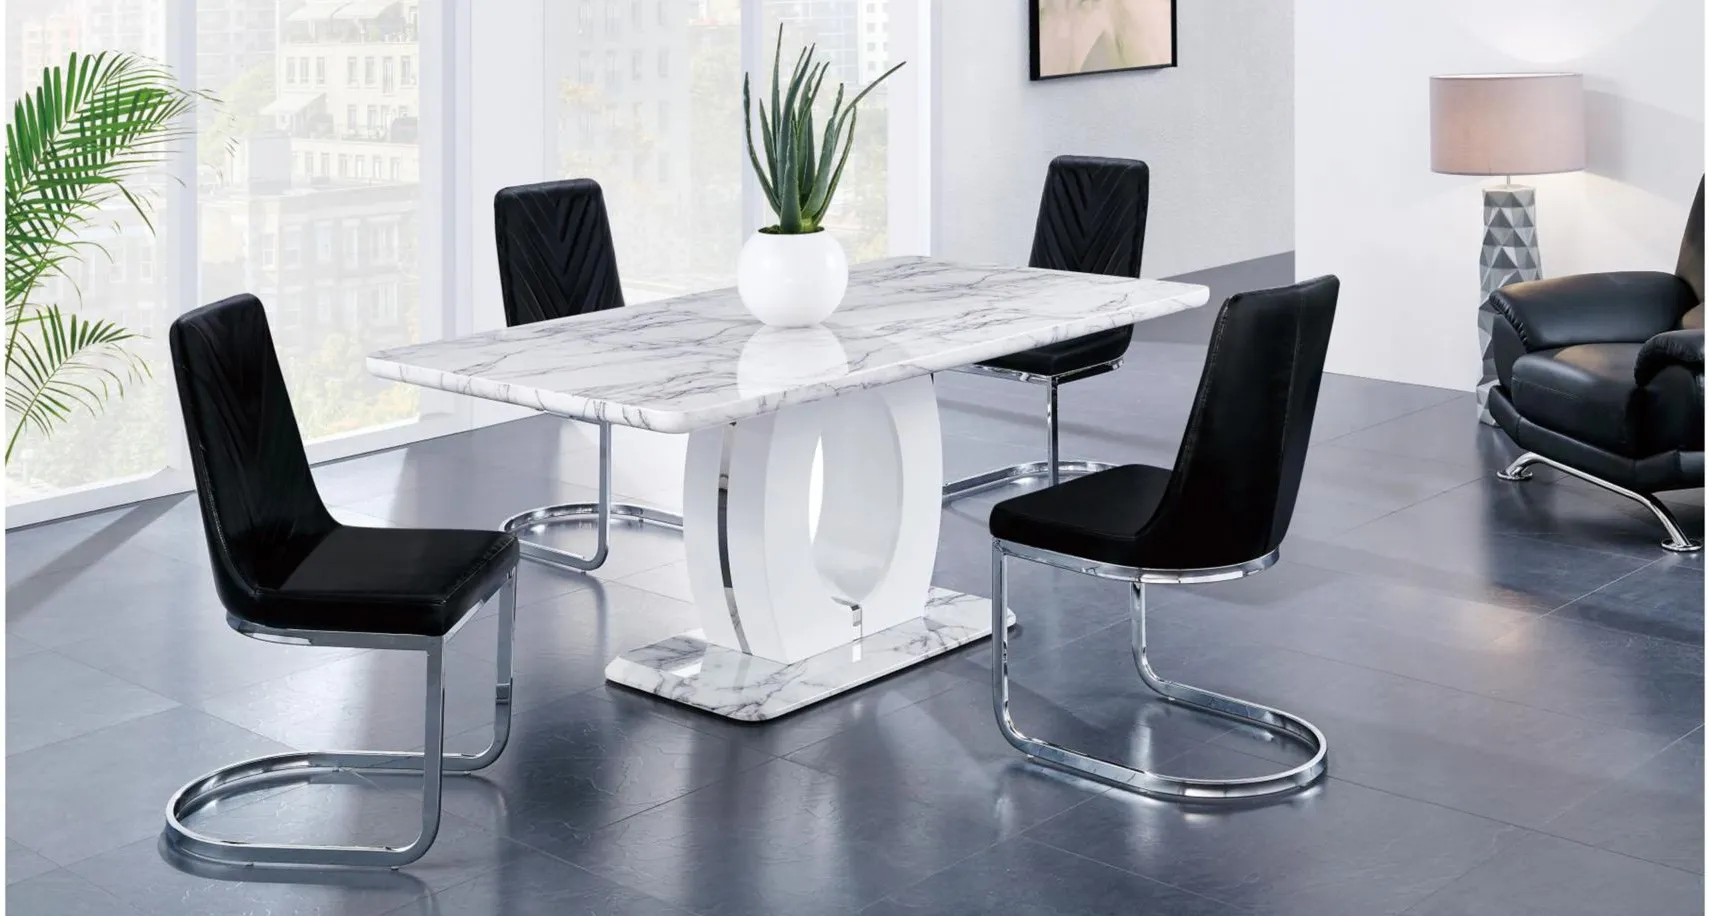 Elevate 5-pc. Dining Set in White Marble / Black by Global Furniture Furniture USA